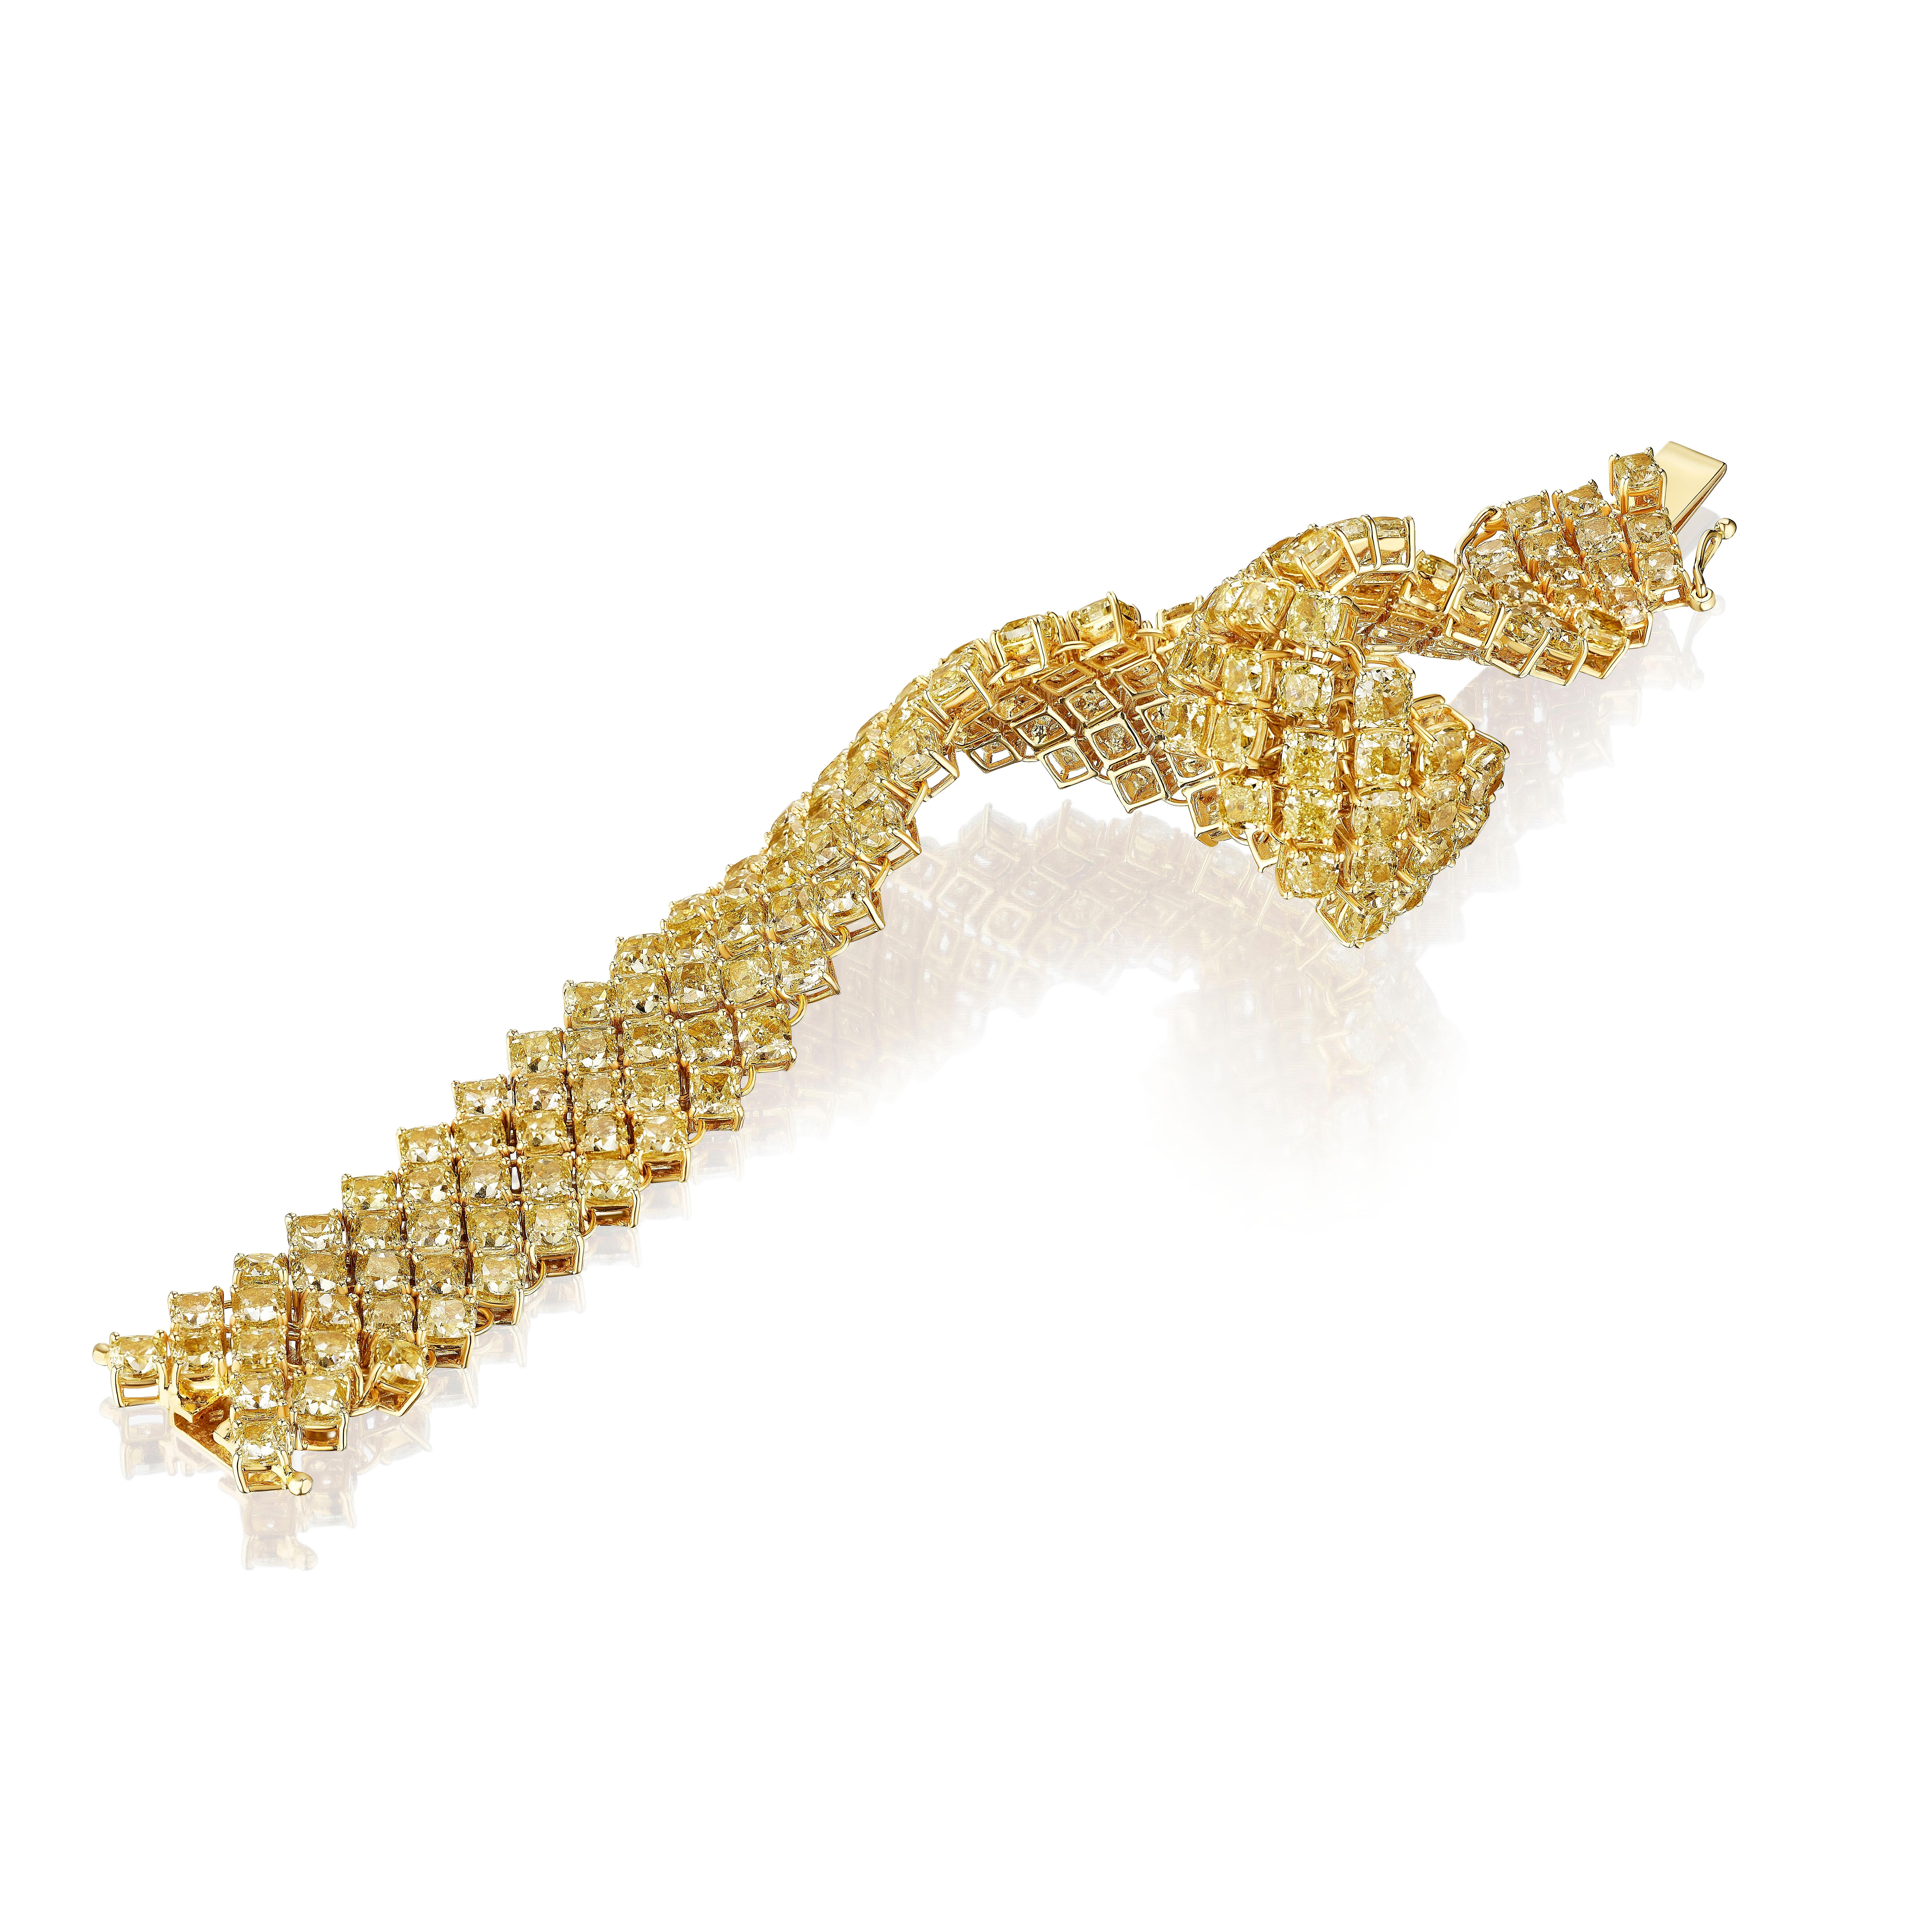 This beautiful Statement bracelet features 180 Cushion Cut Yellow Diamonds set at an angle in a multi row design.
42.50 Carat Total Weight.


Fits an 7.25 inch wrist. 
Set in 18 Karat Yellow Gold. 